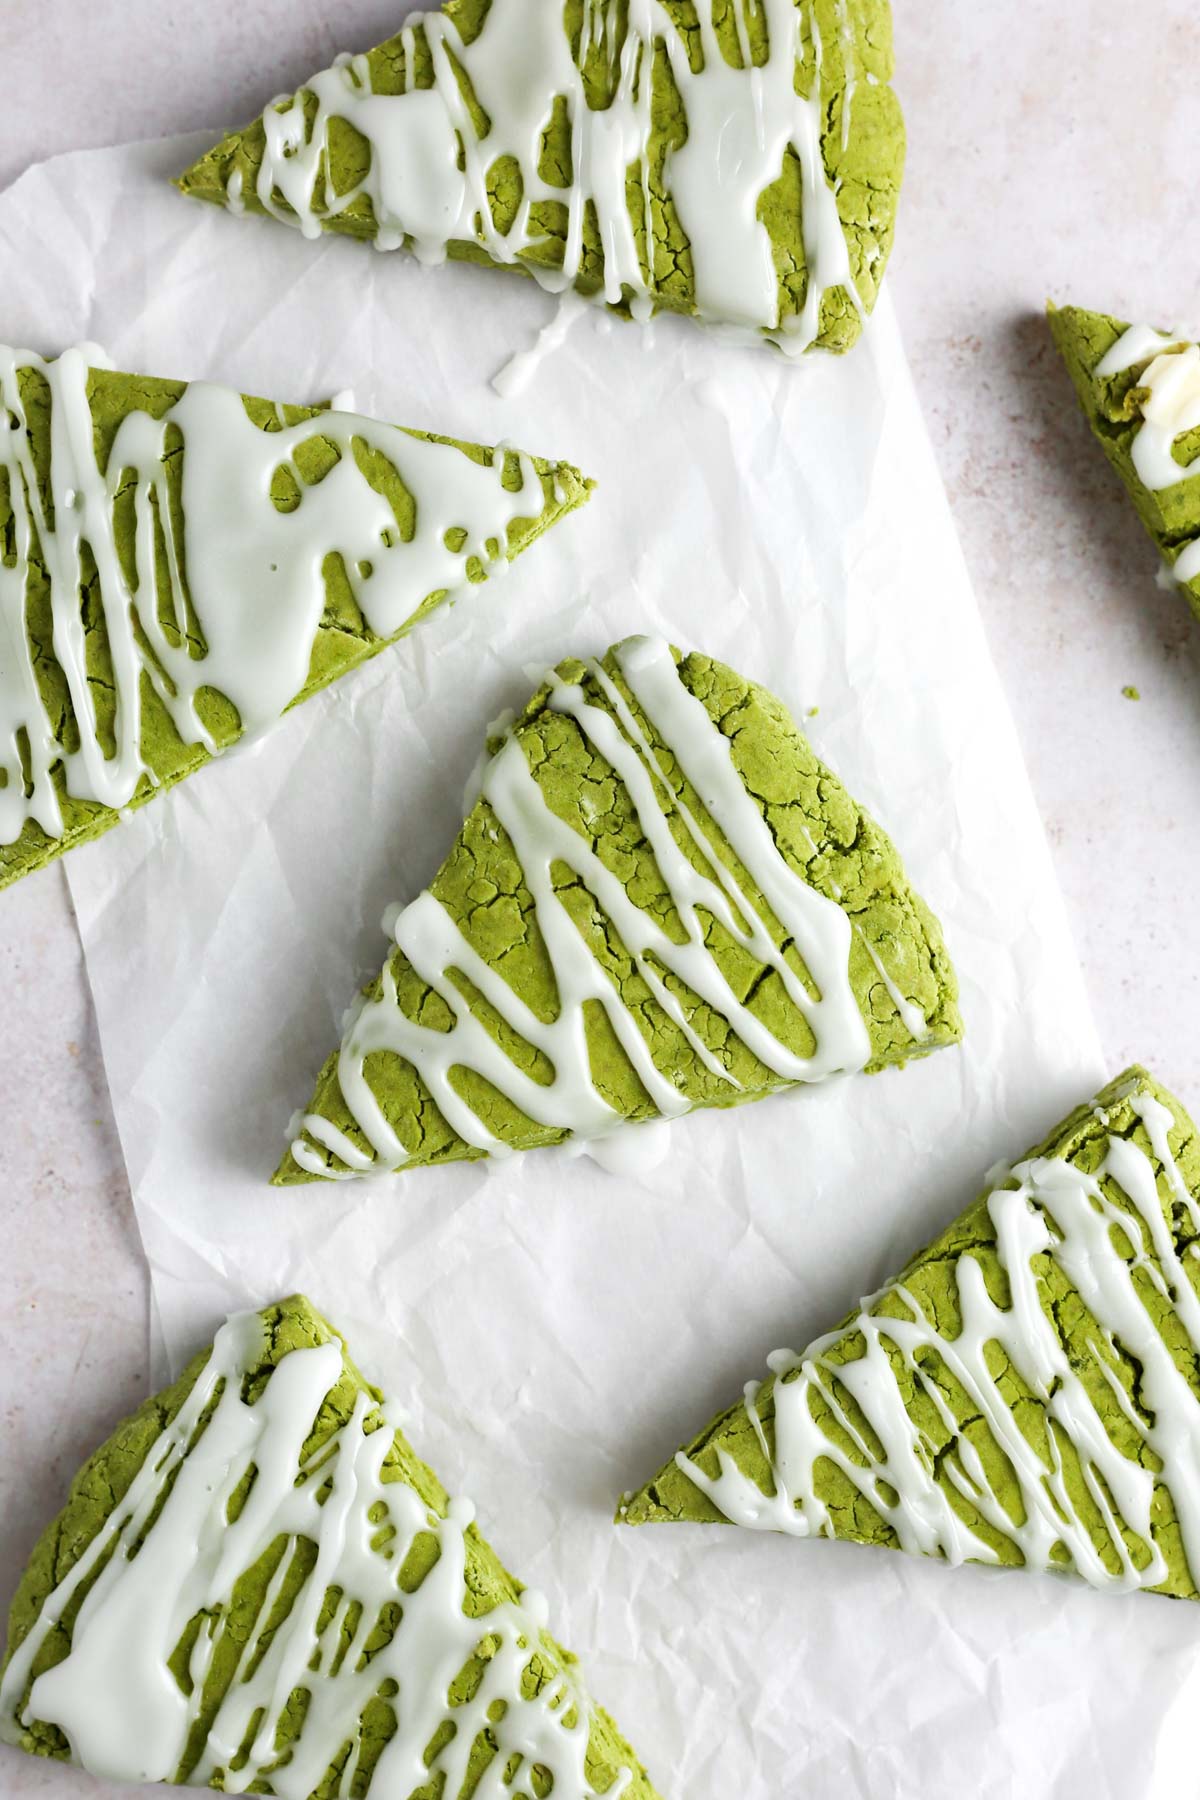 GREEN SCONES easy green desserts for St Patricks Day. Get tons of dessert ideas from decadent, no bake, easy, vegan and green!